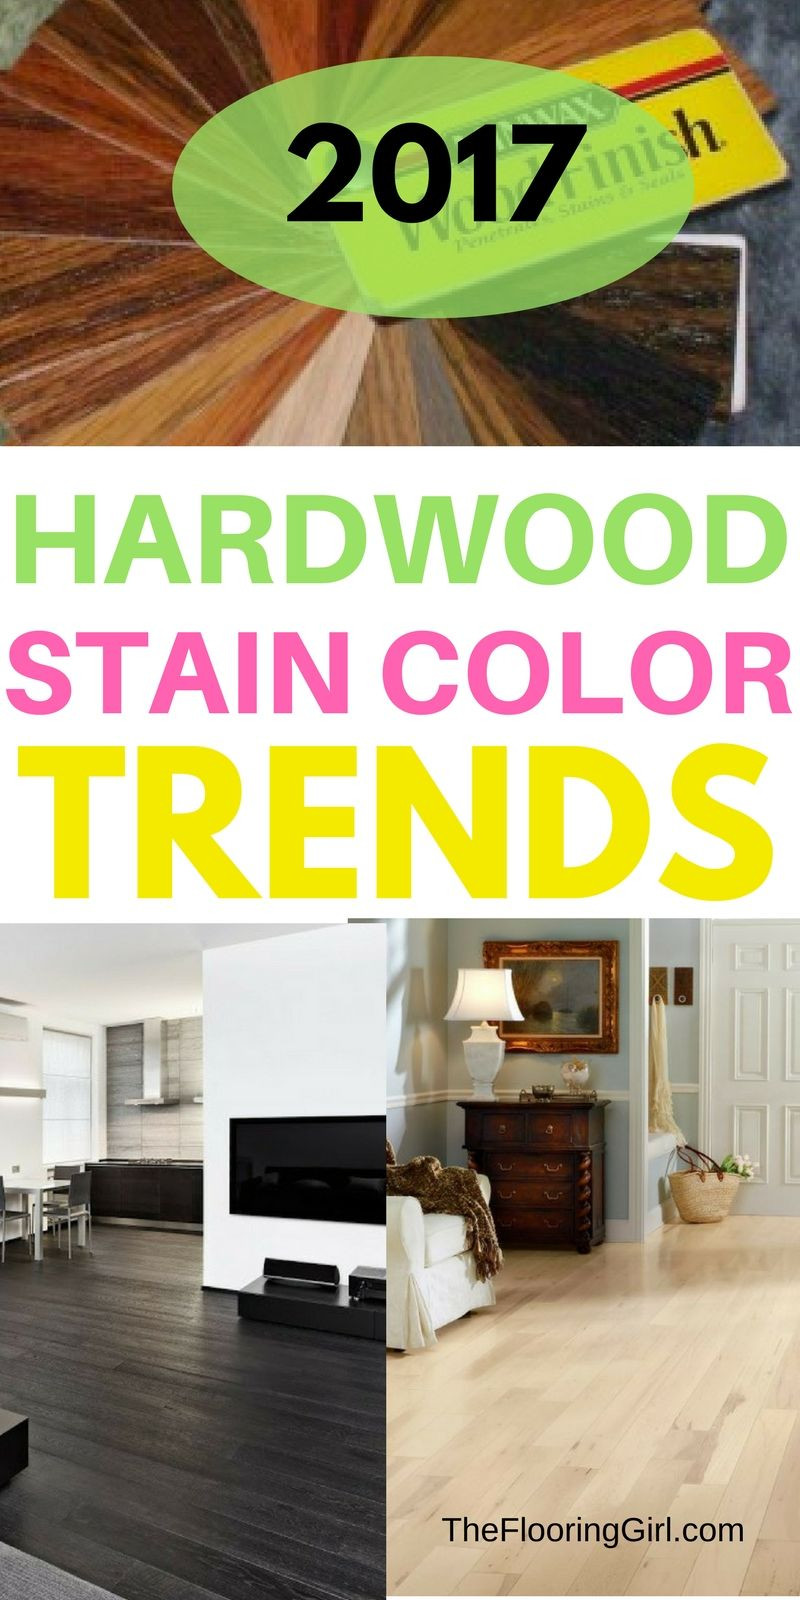 11 Cute Unfinished Hardwood Flooring Cost 2024 free download unfinished hardwood flooring cost of hardwood flooring stain color trends 2018 more from the flooring pertaining to hardwood flooring stain color trends for 2017 hardwood colors that are in 